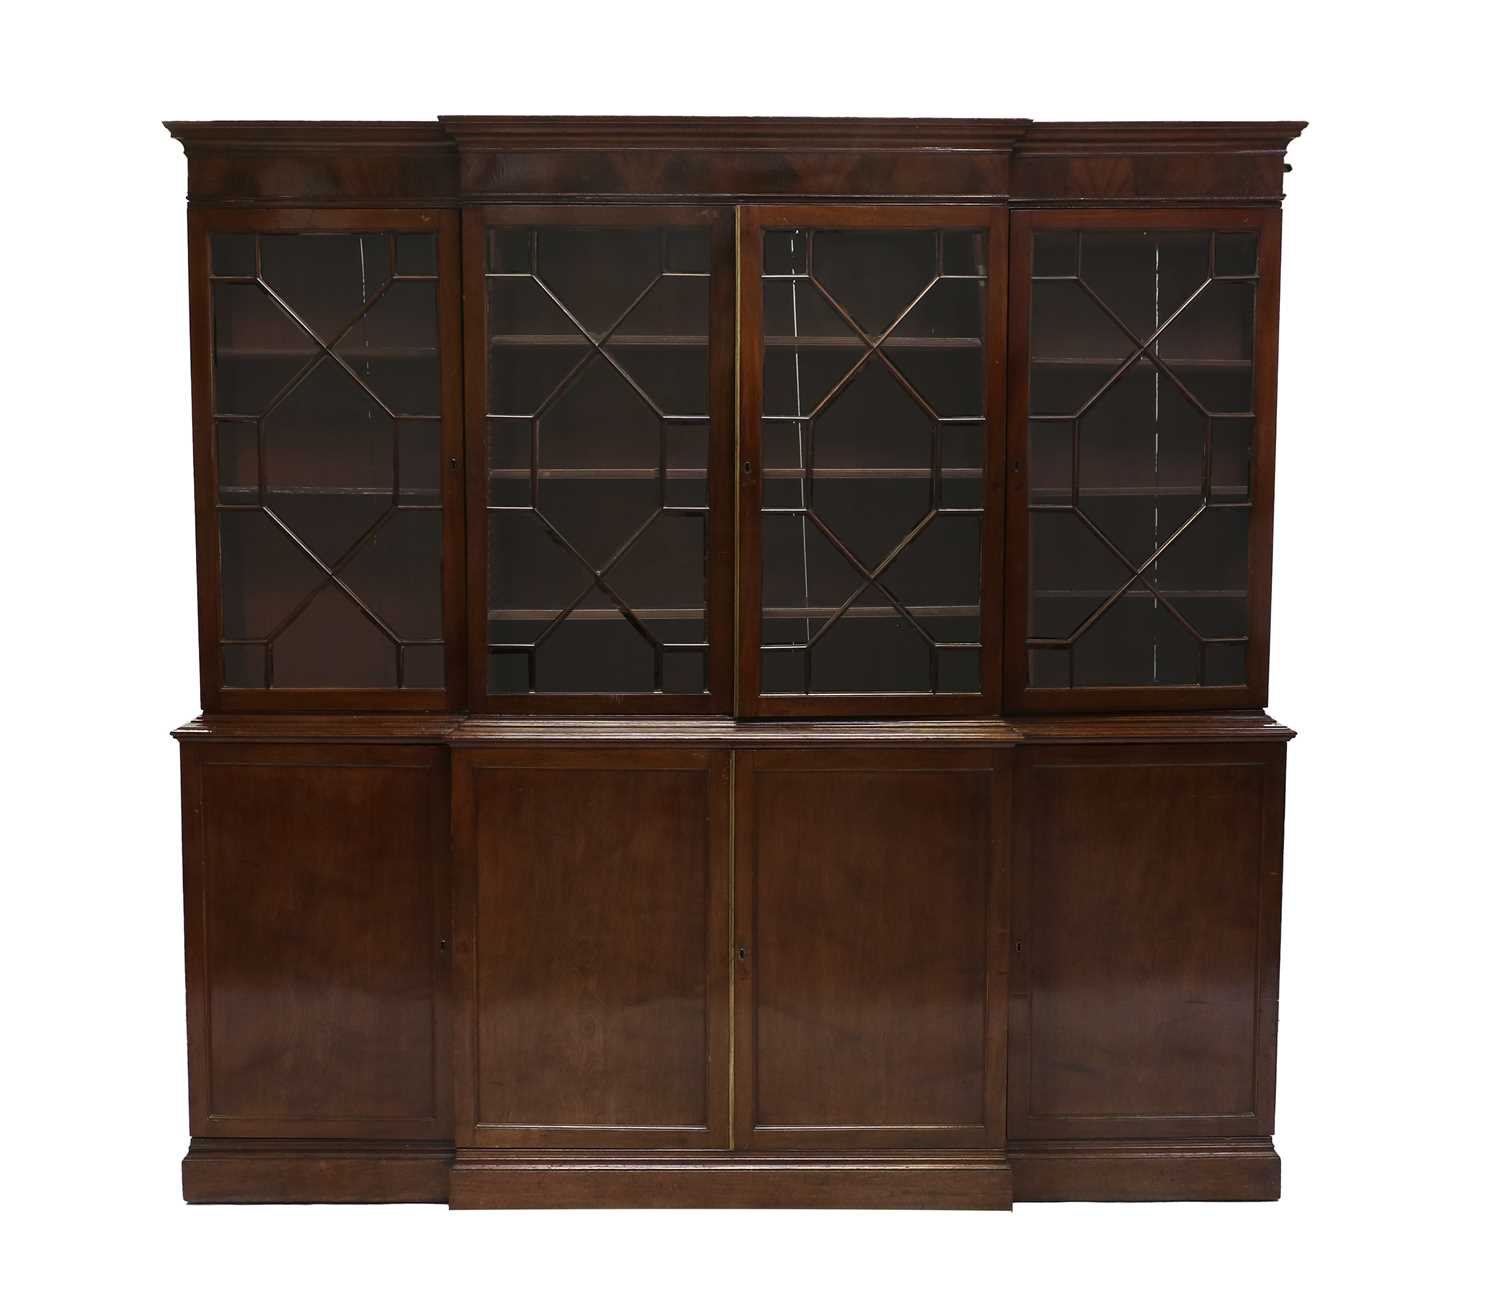 A Late George III Mahogany Four-Door Breakfront Library Bookcase, early 19th century, the moulded